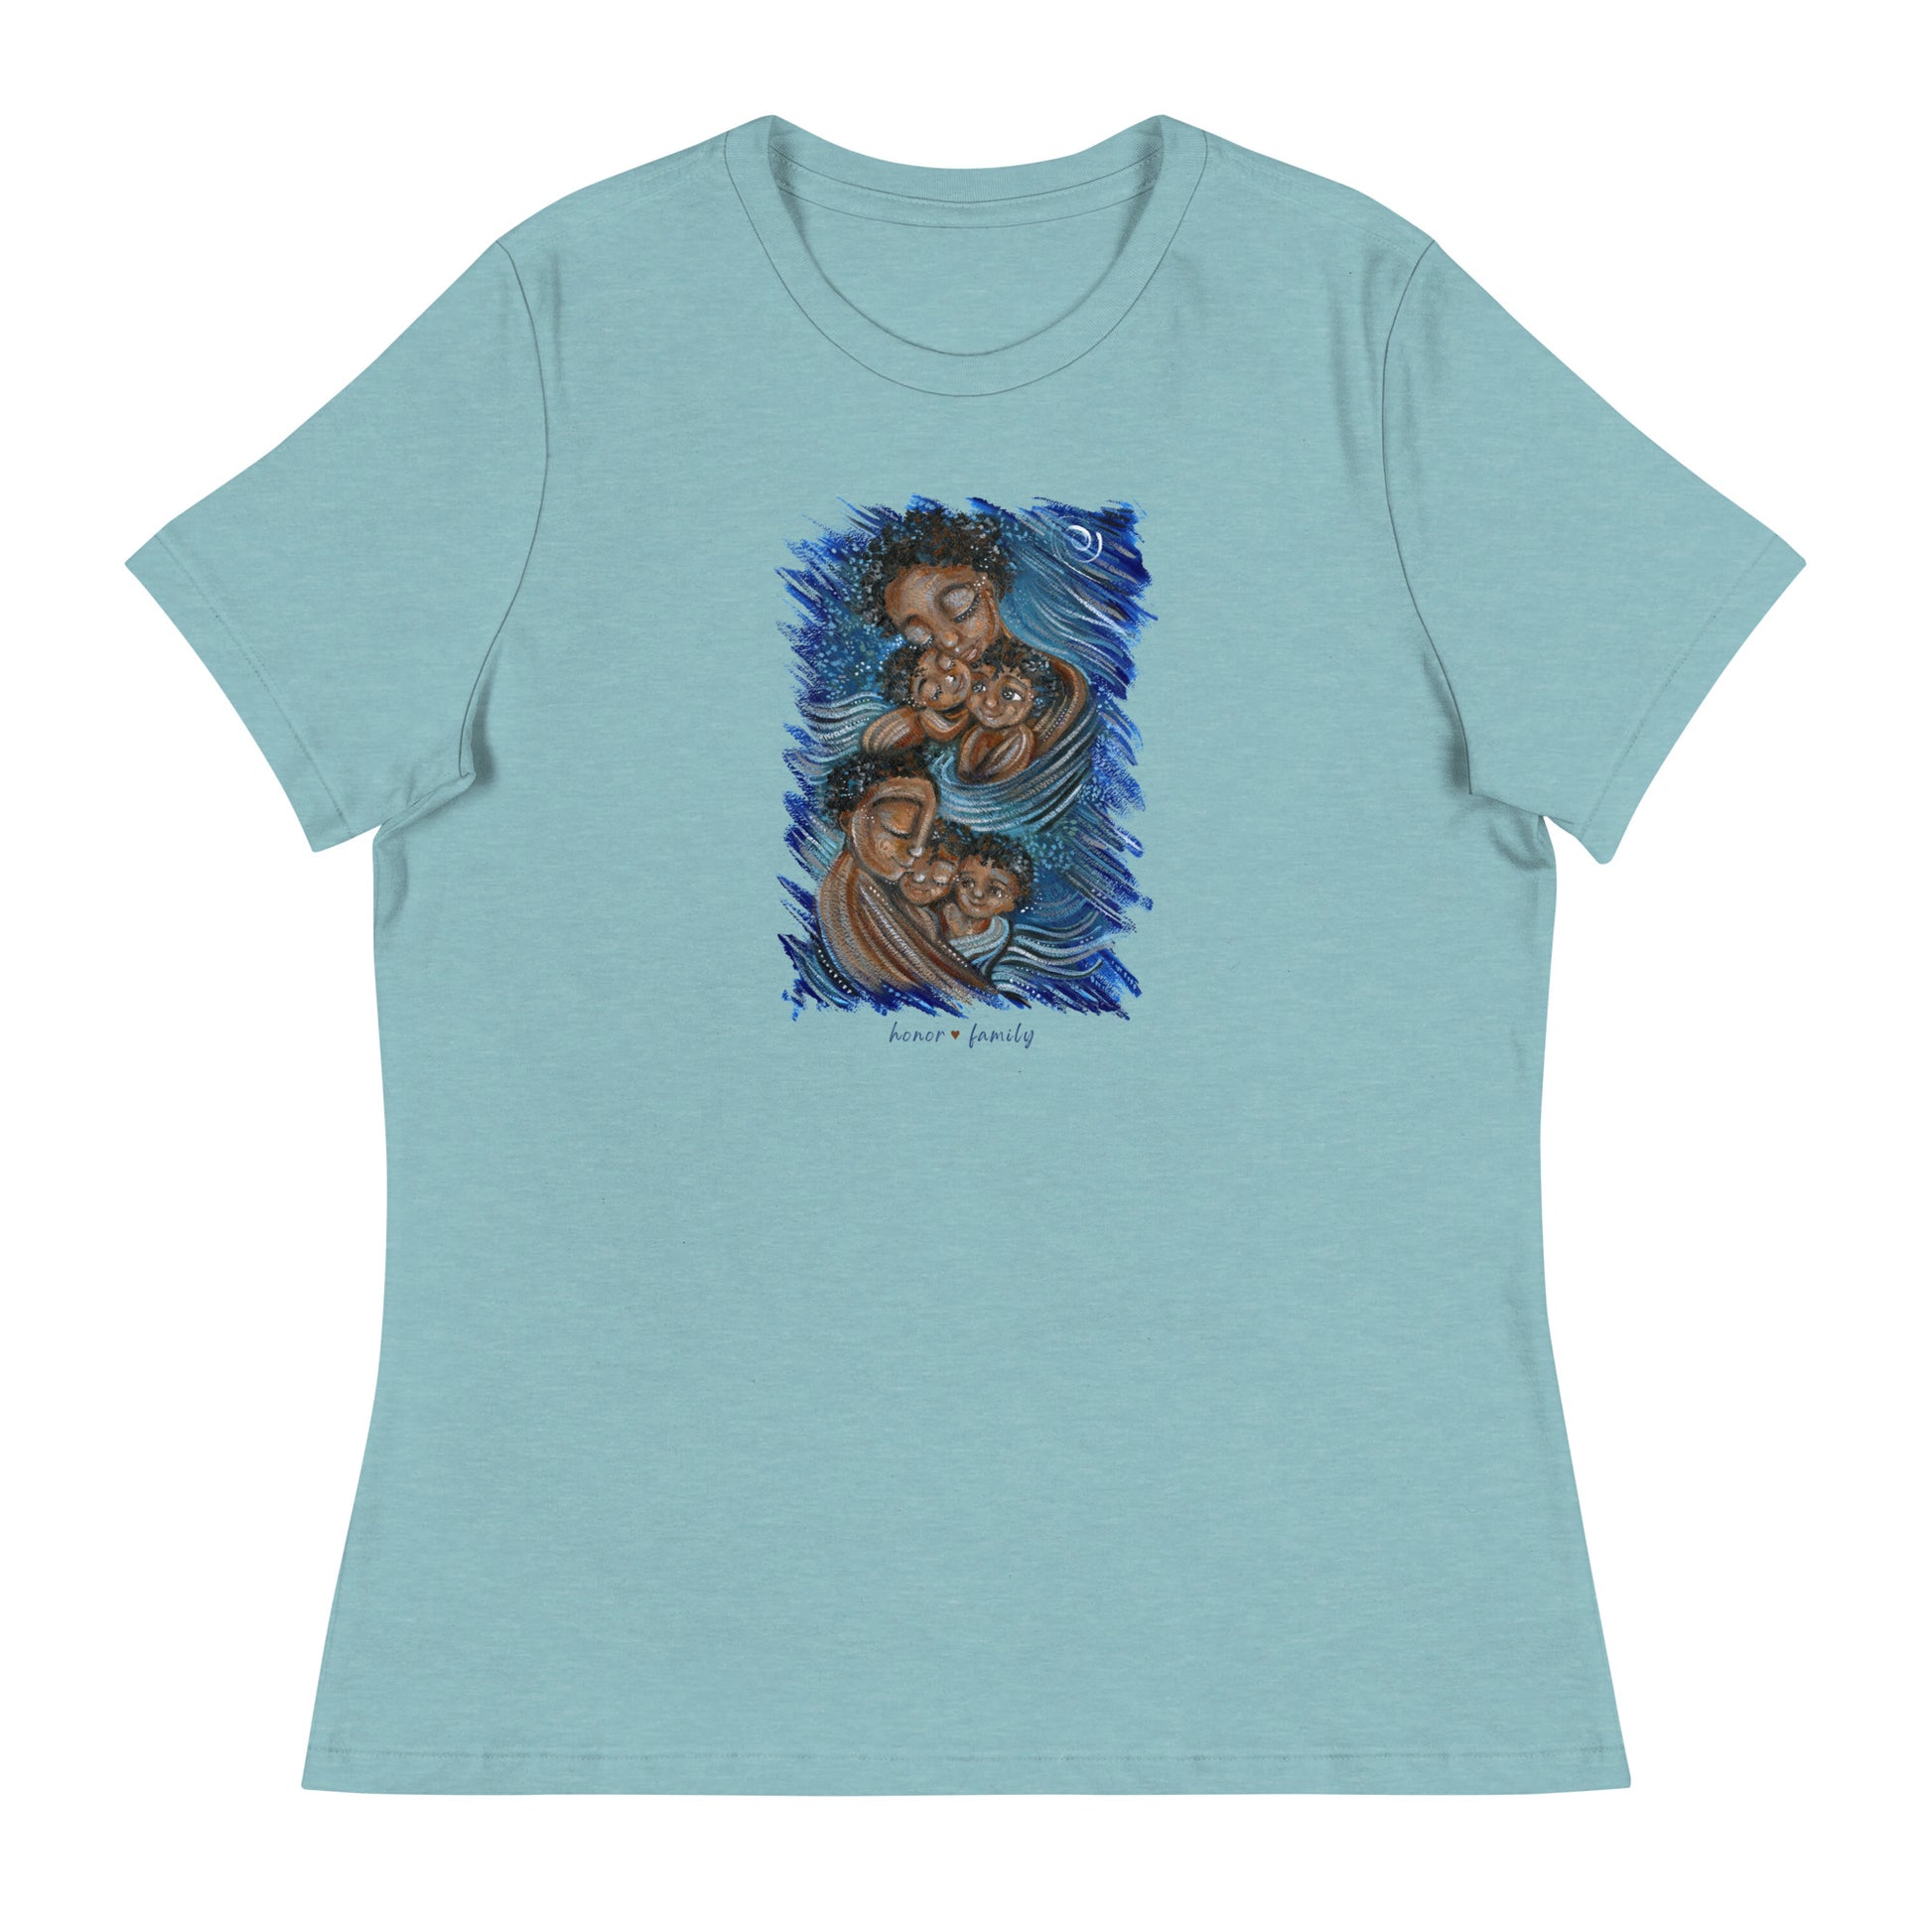 mother and child t-shirt, mom baby shirt, graphic tee motherhood, mother and kids graphic tee, mother child teeshirt, mama baby tee, baby mama t-shirt, tshirt motherhood, gift shirt for mom, wearable art for mom, new baby gift, new mom shirt, new mom gift, kmberggren art on shirts, art clothing, family of color shirt, women of color art, black family on tshirt, painting of black family, cheerful shirt for mom, bright colored art shirt